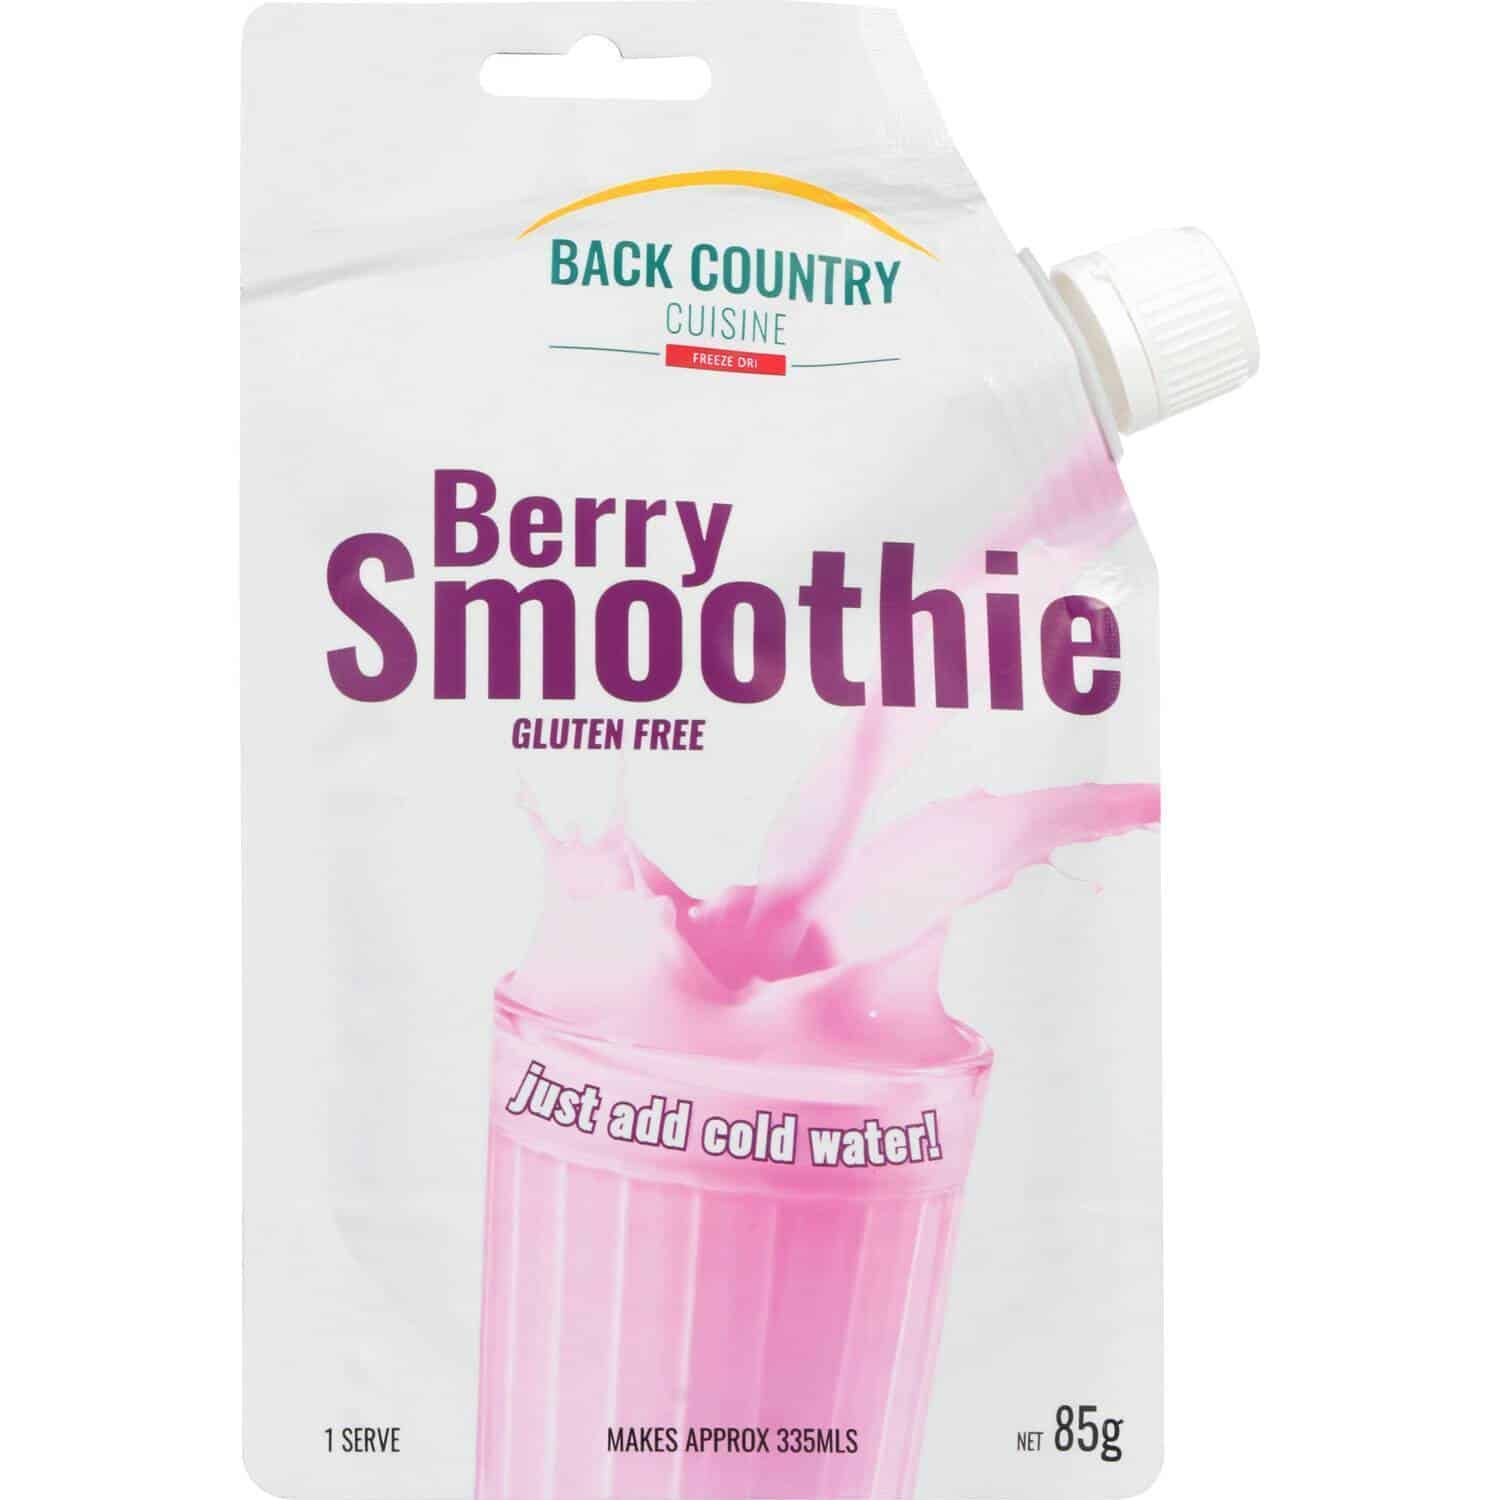 Back Country Cuisine Berry Smoothie - Tramping Food and Accessories sold by Venture Outdoors NZ